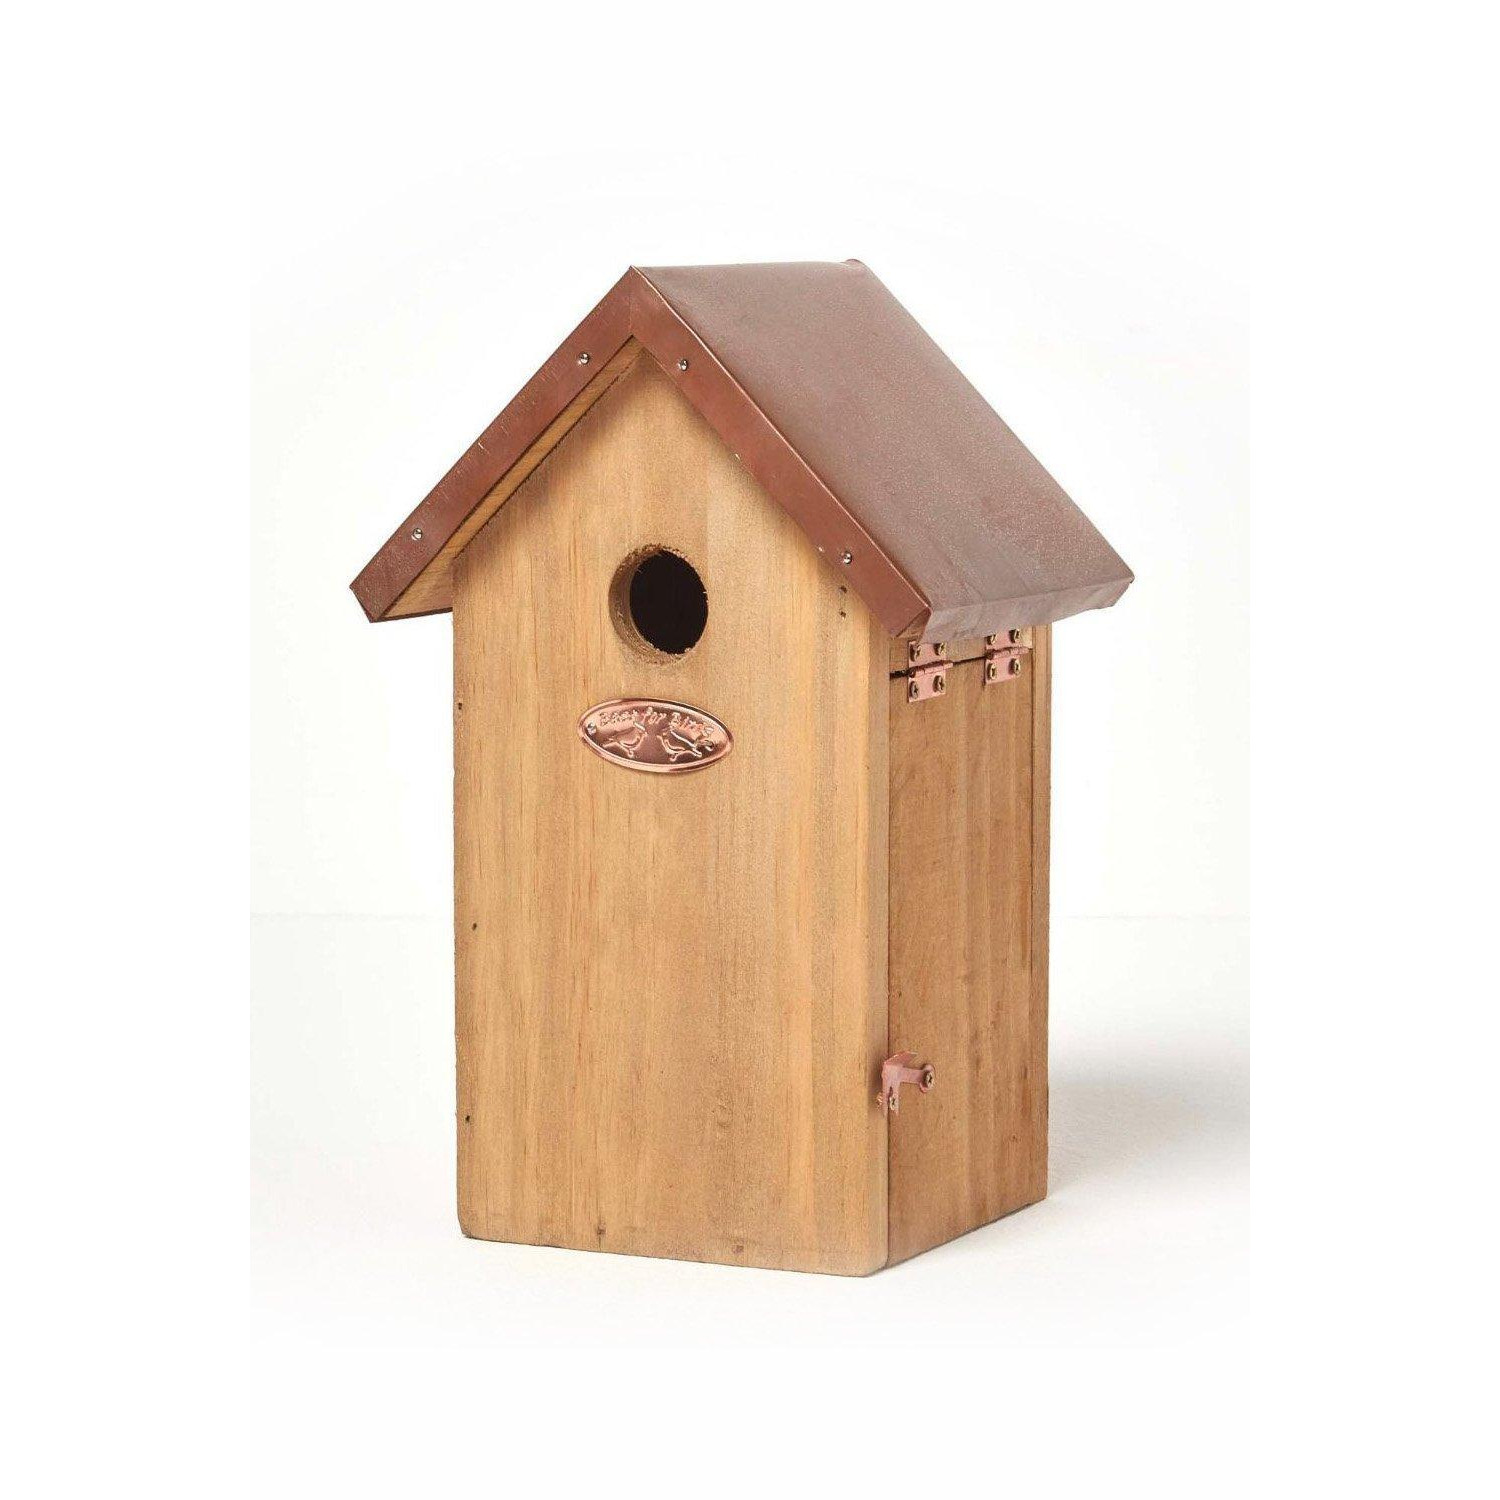 Wooden Blue Tit Bird Box House with Copper Roof - image 1